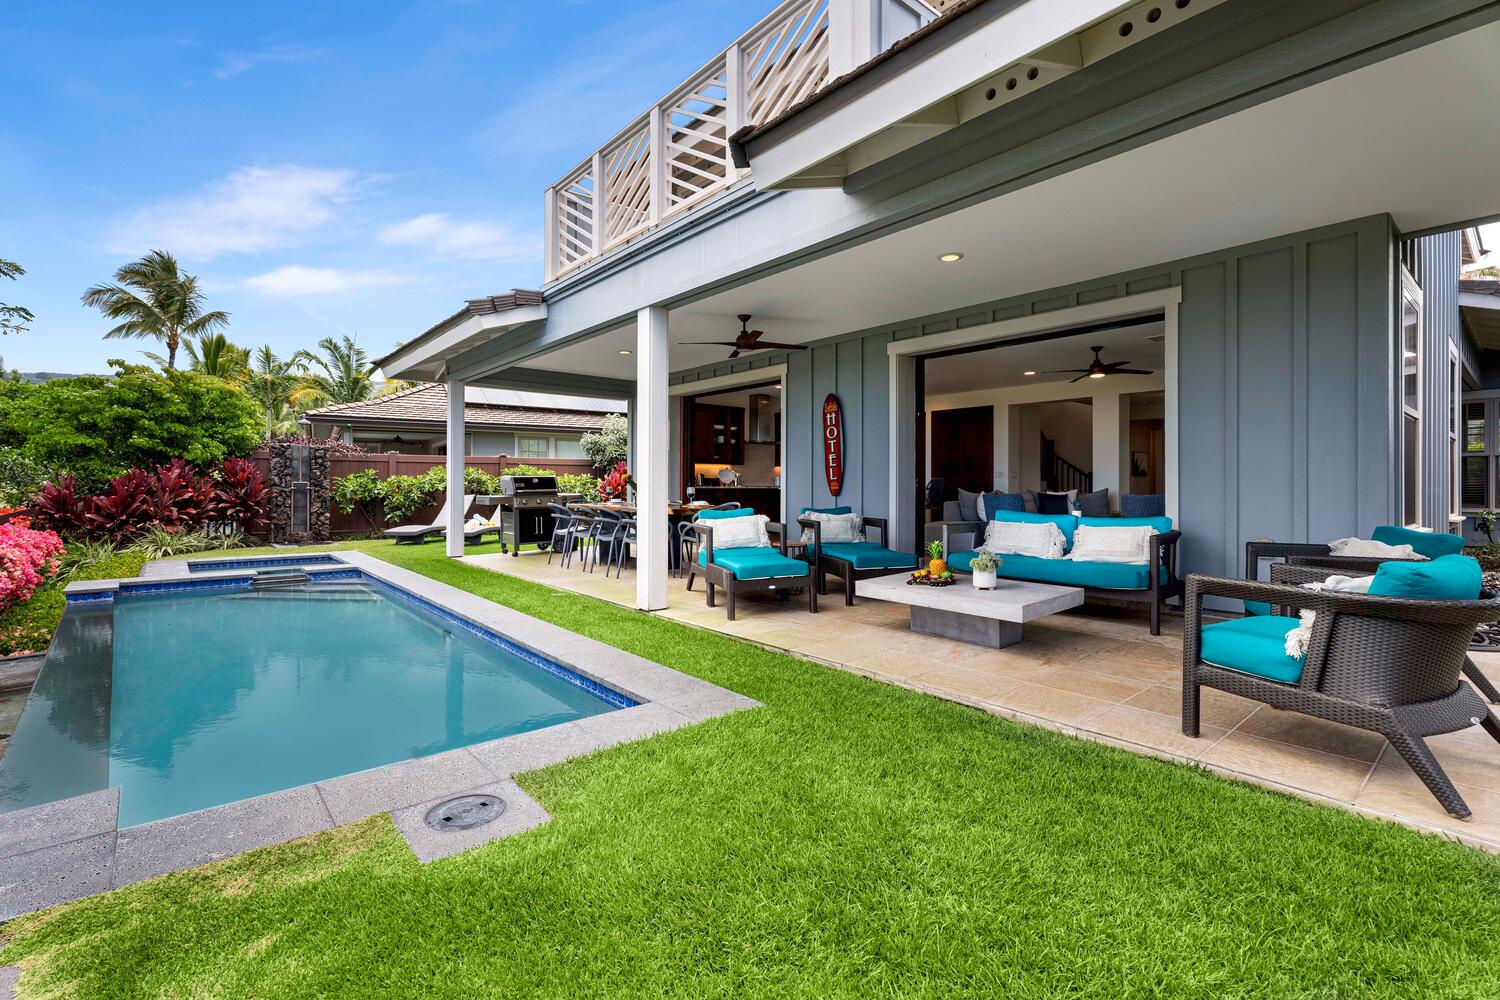 Kailua-Kona Vacation Rentals, Holua Kai #26 - Spacious backyard with a refreshing pool and an inviting open-air lounge area, ideal for both relaxation and entertaining.